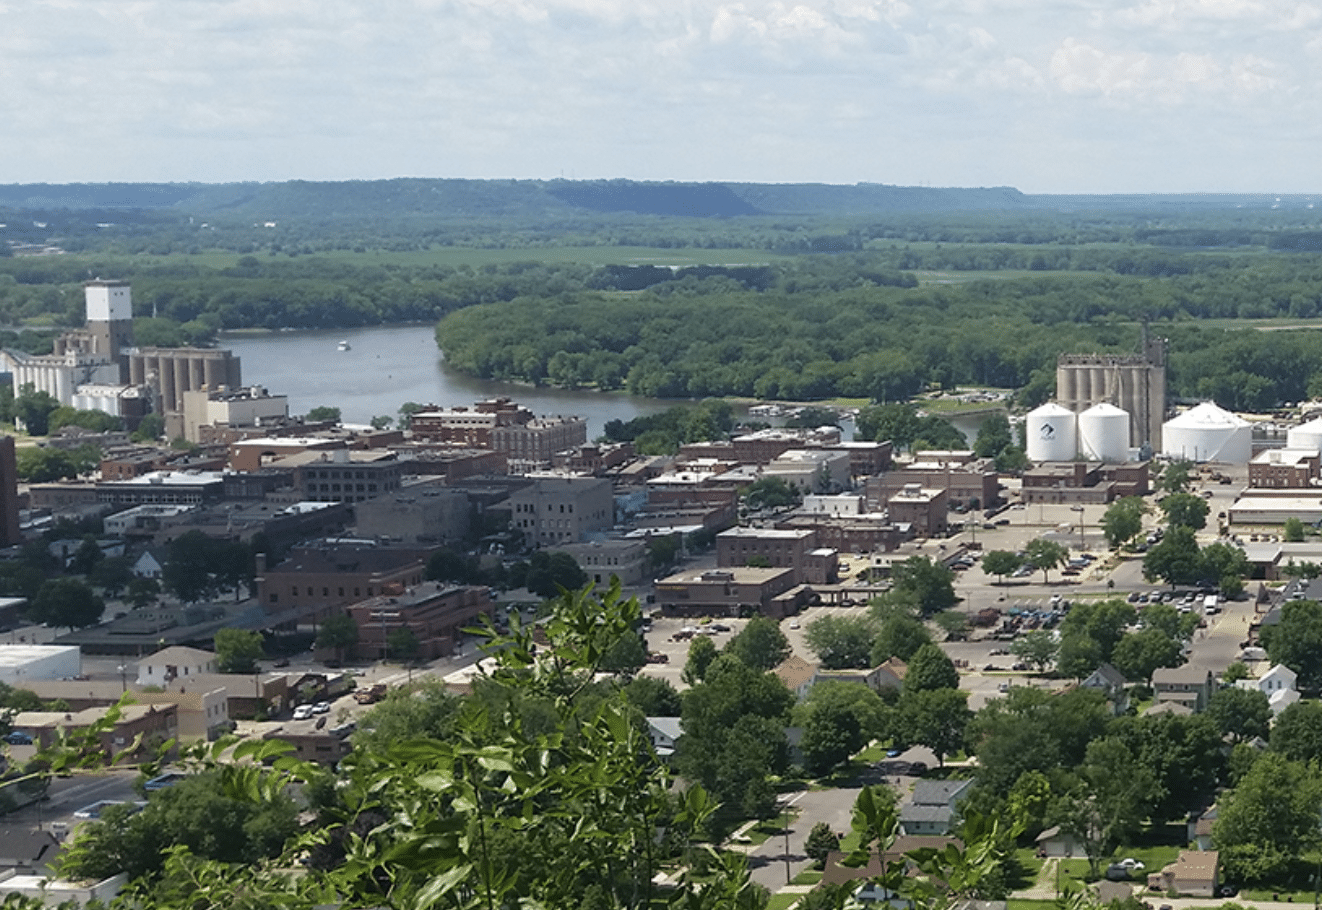 Aerial view of town next to forested area